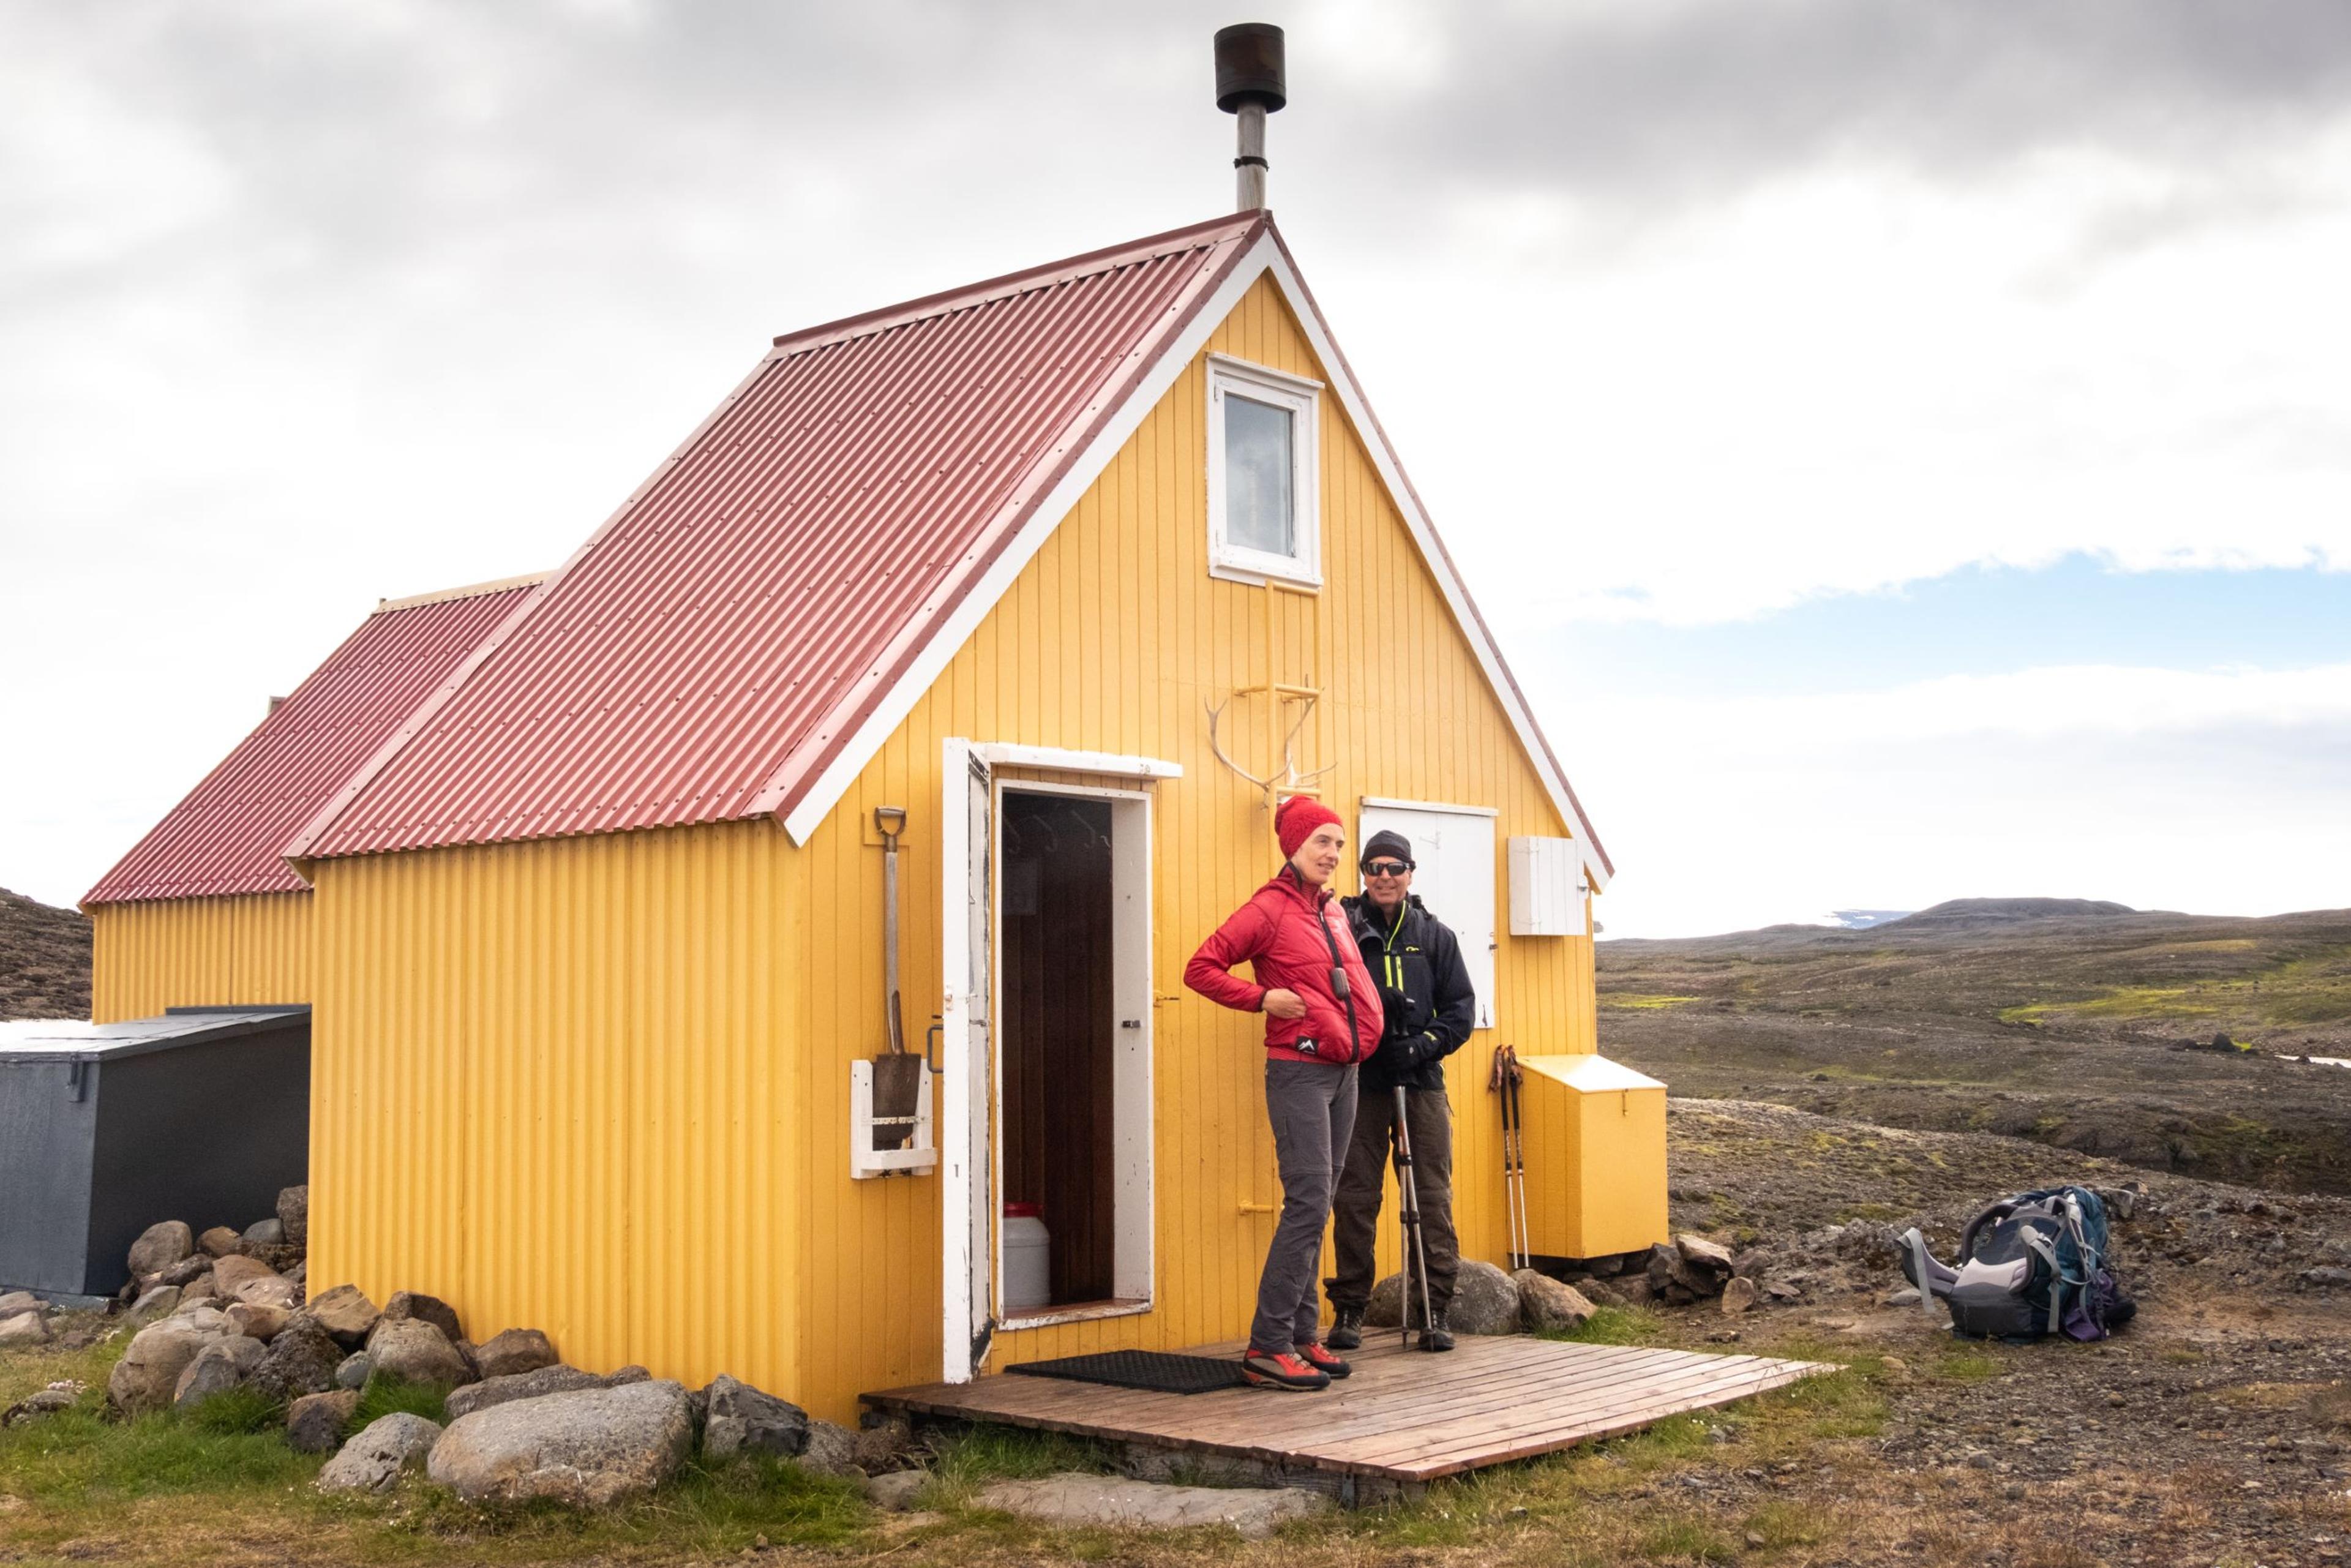 Two hikers posing in front of a quaint yellow hut in a wilderness setting.